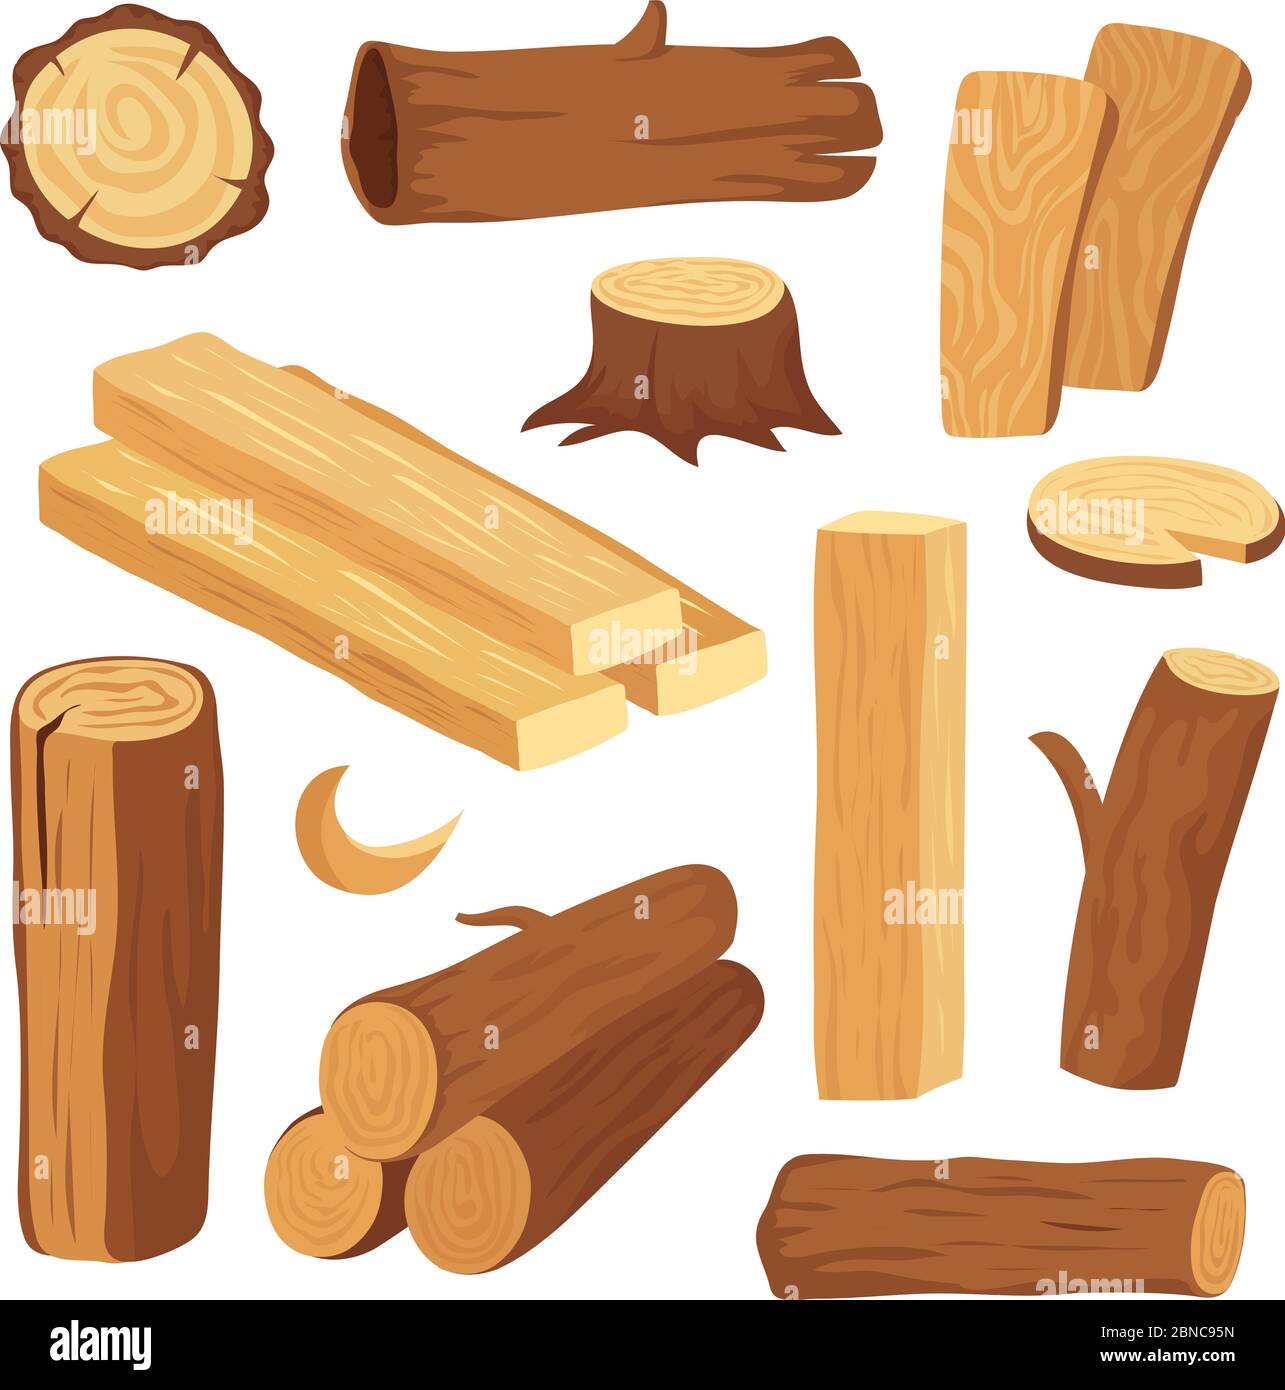 Cartoon timber. Wood log and trunk, stump and plank. Wooden firewood logs. Hardwoods construction materials vector isolated set. Illustration of firewood and timber natural Stock Vector